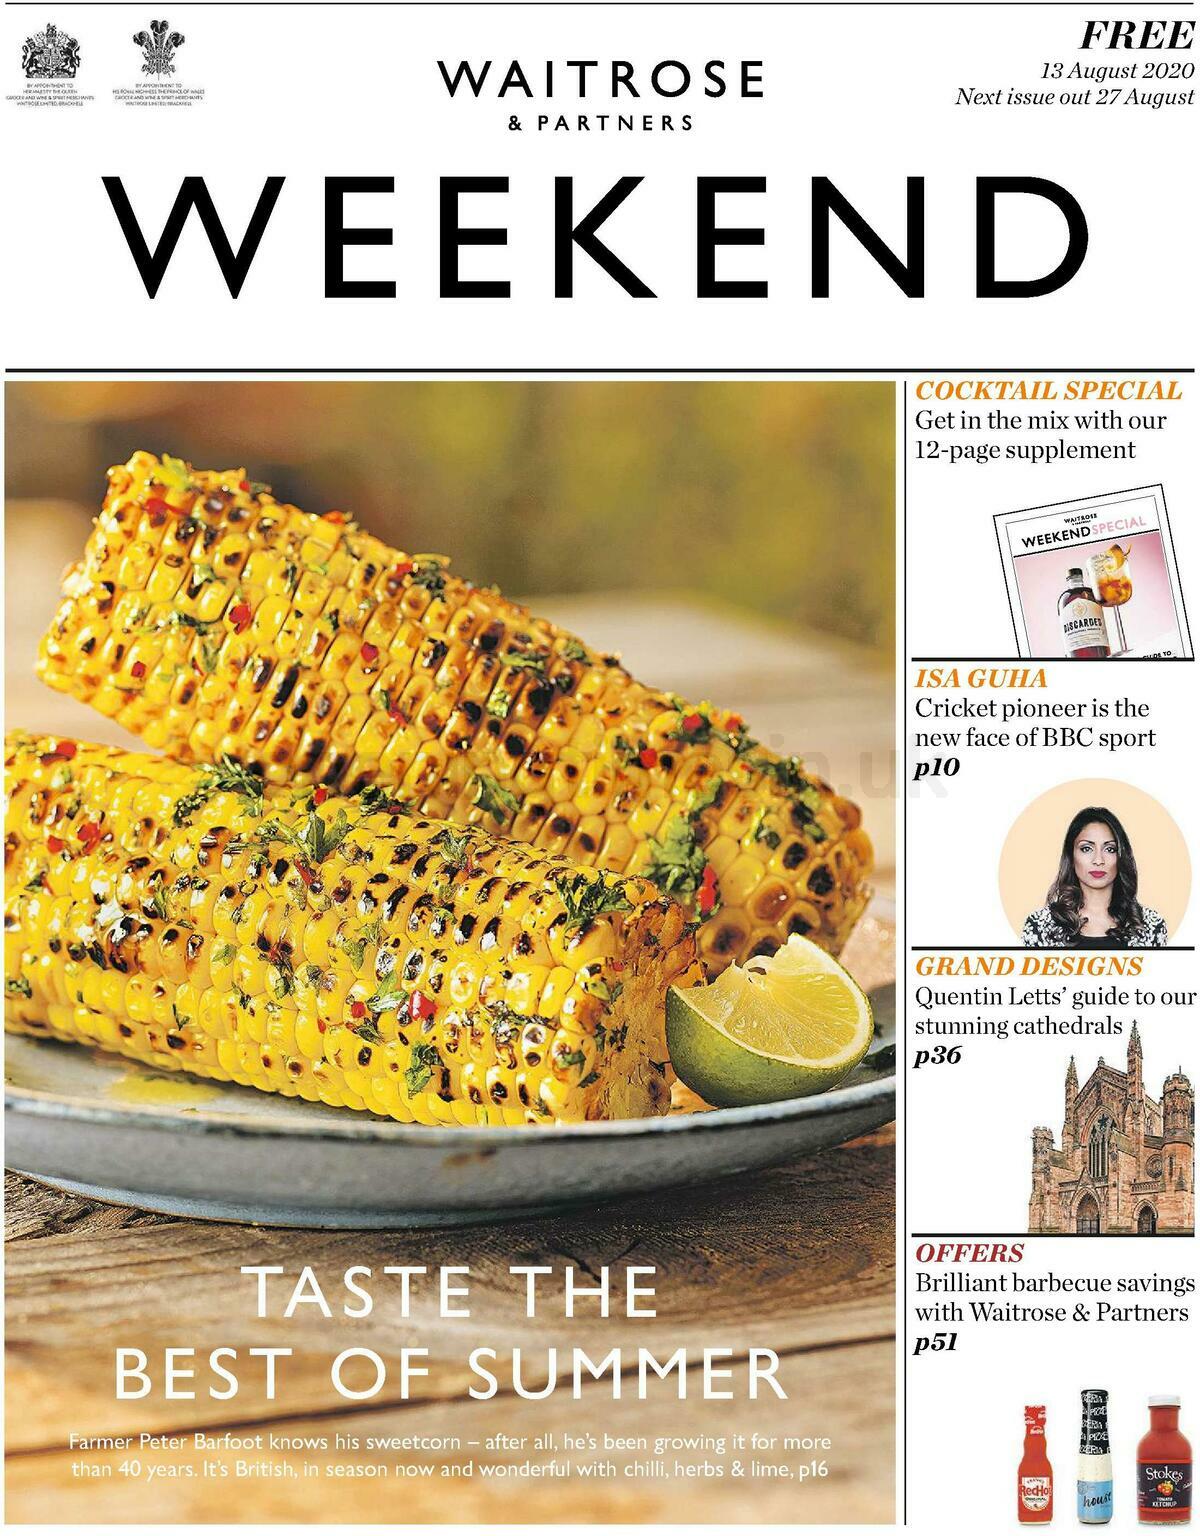 Waitrose Offers from 13 August